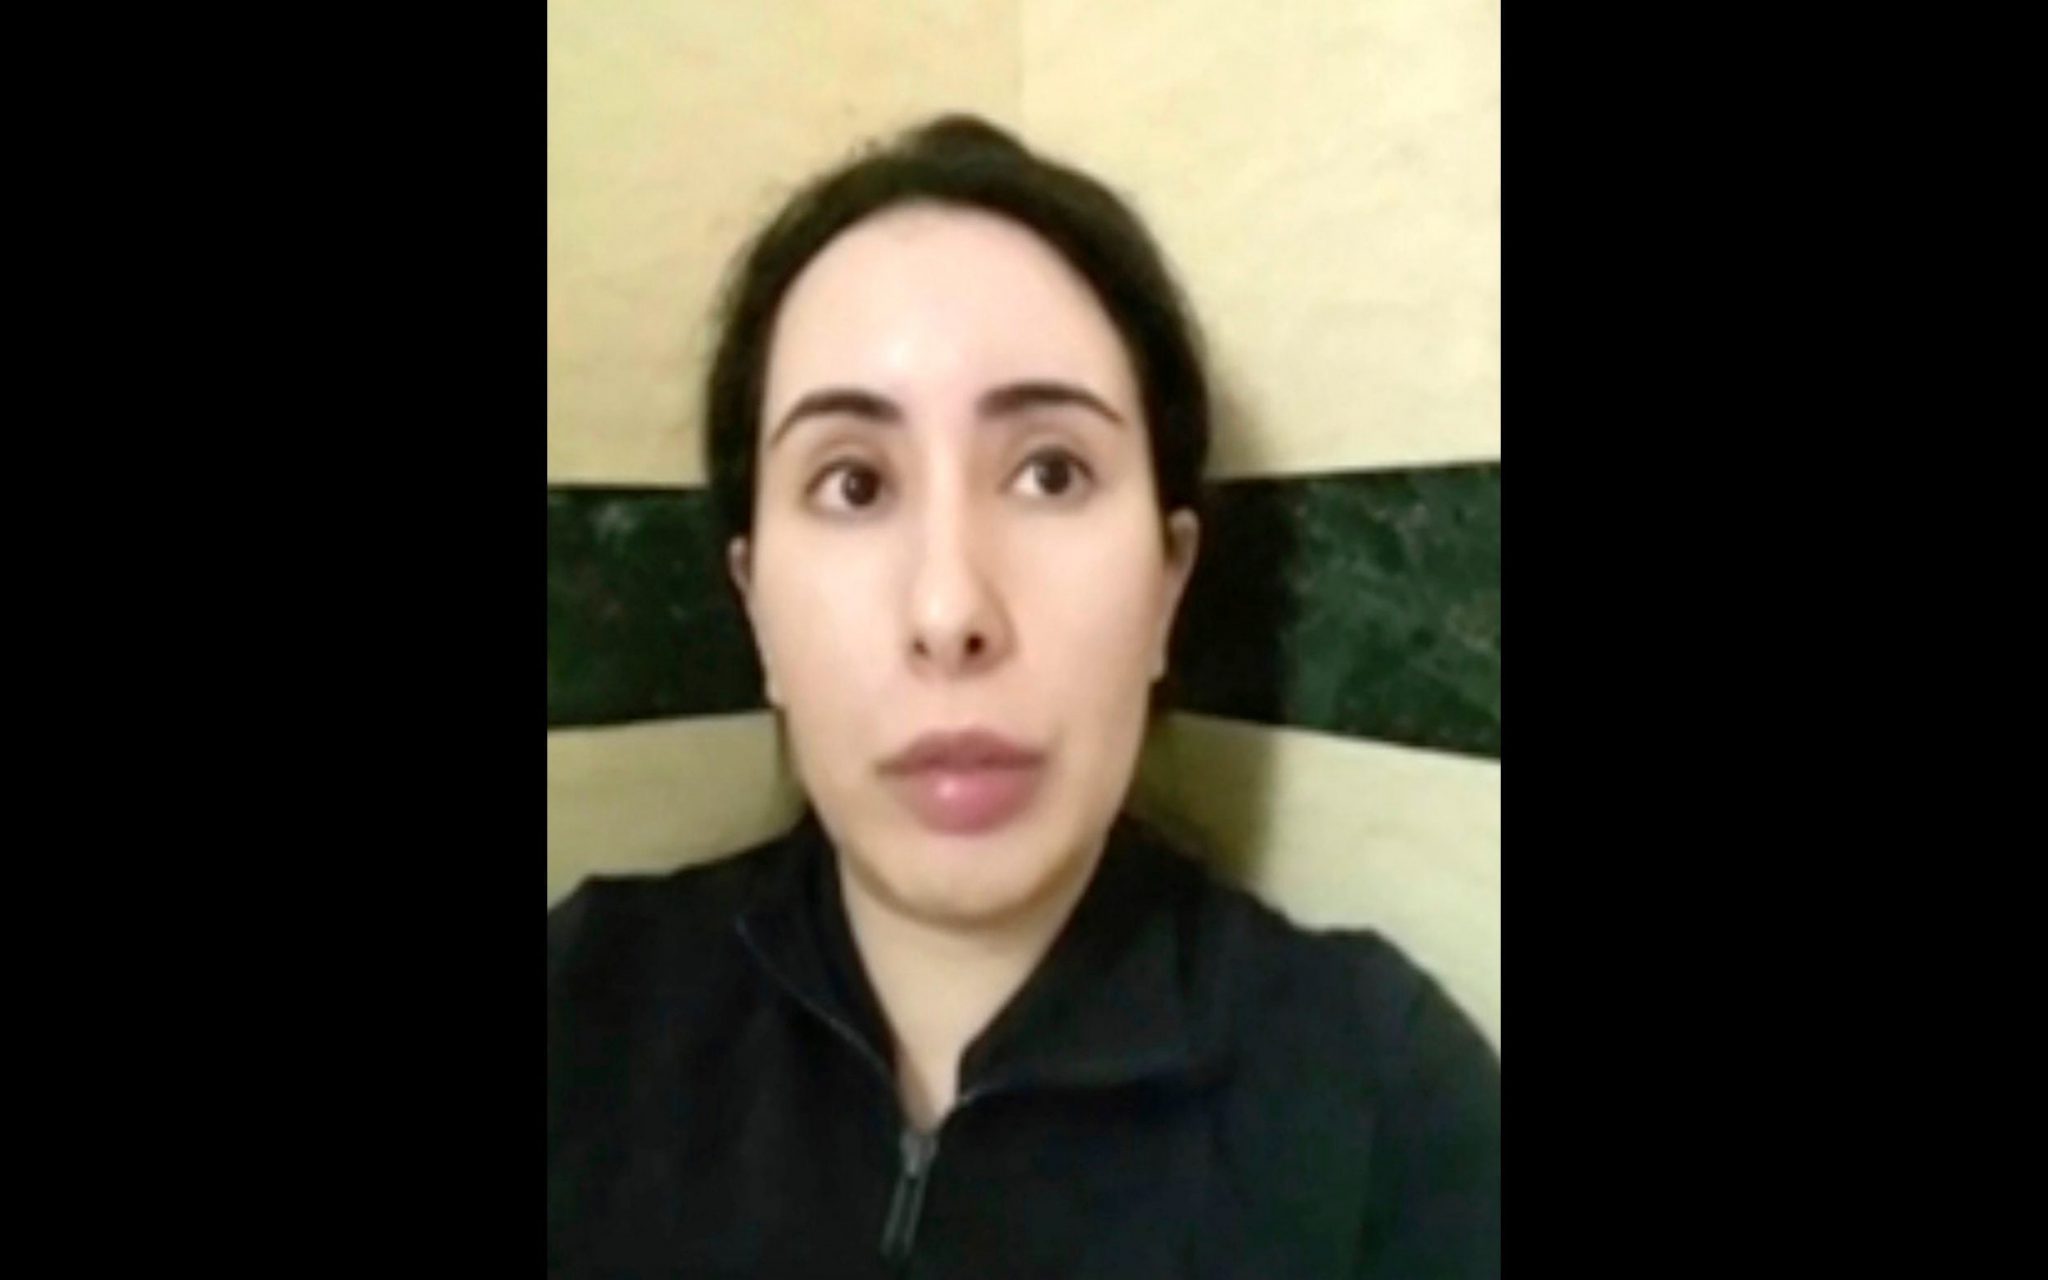 Campaign to free Princess Latifa says it has more unreleased videos from detained Dubai royal